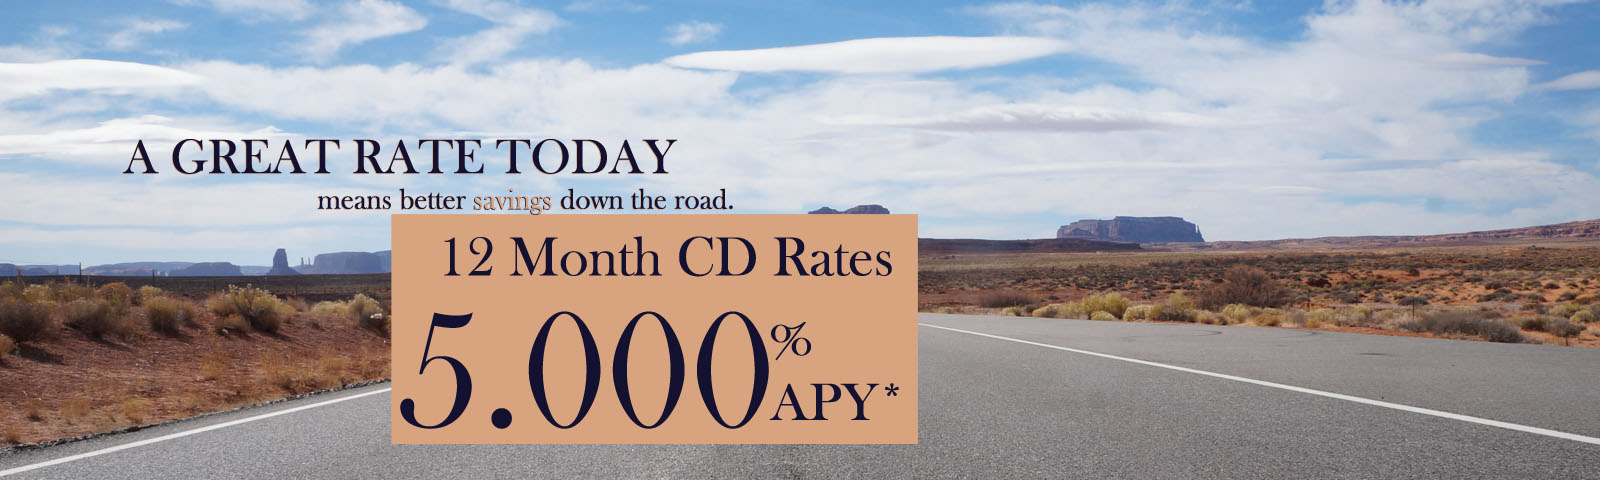 A great rate today means better savings down the road. 12 Month CD Rates at 5.000% APY*